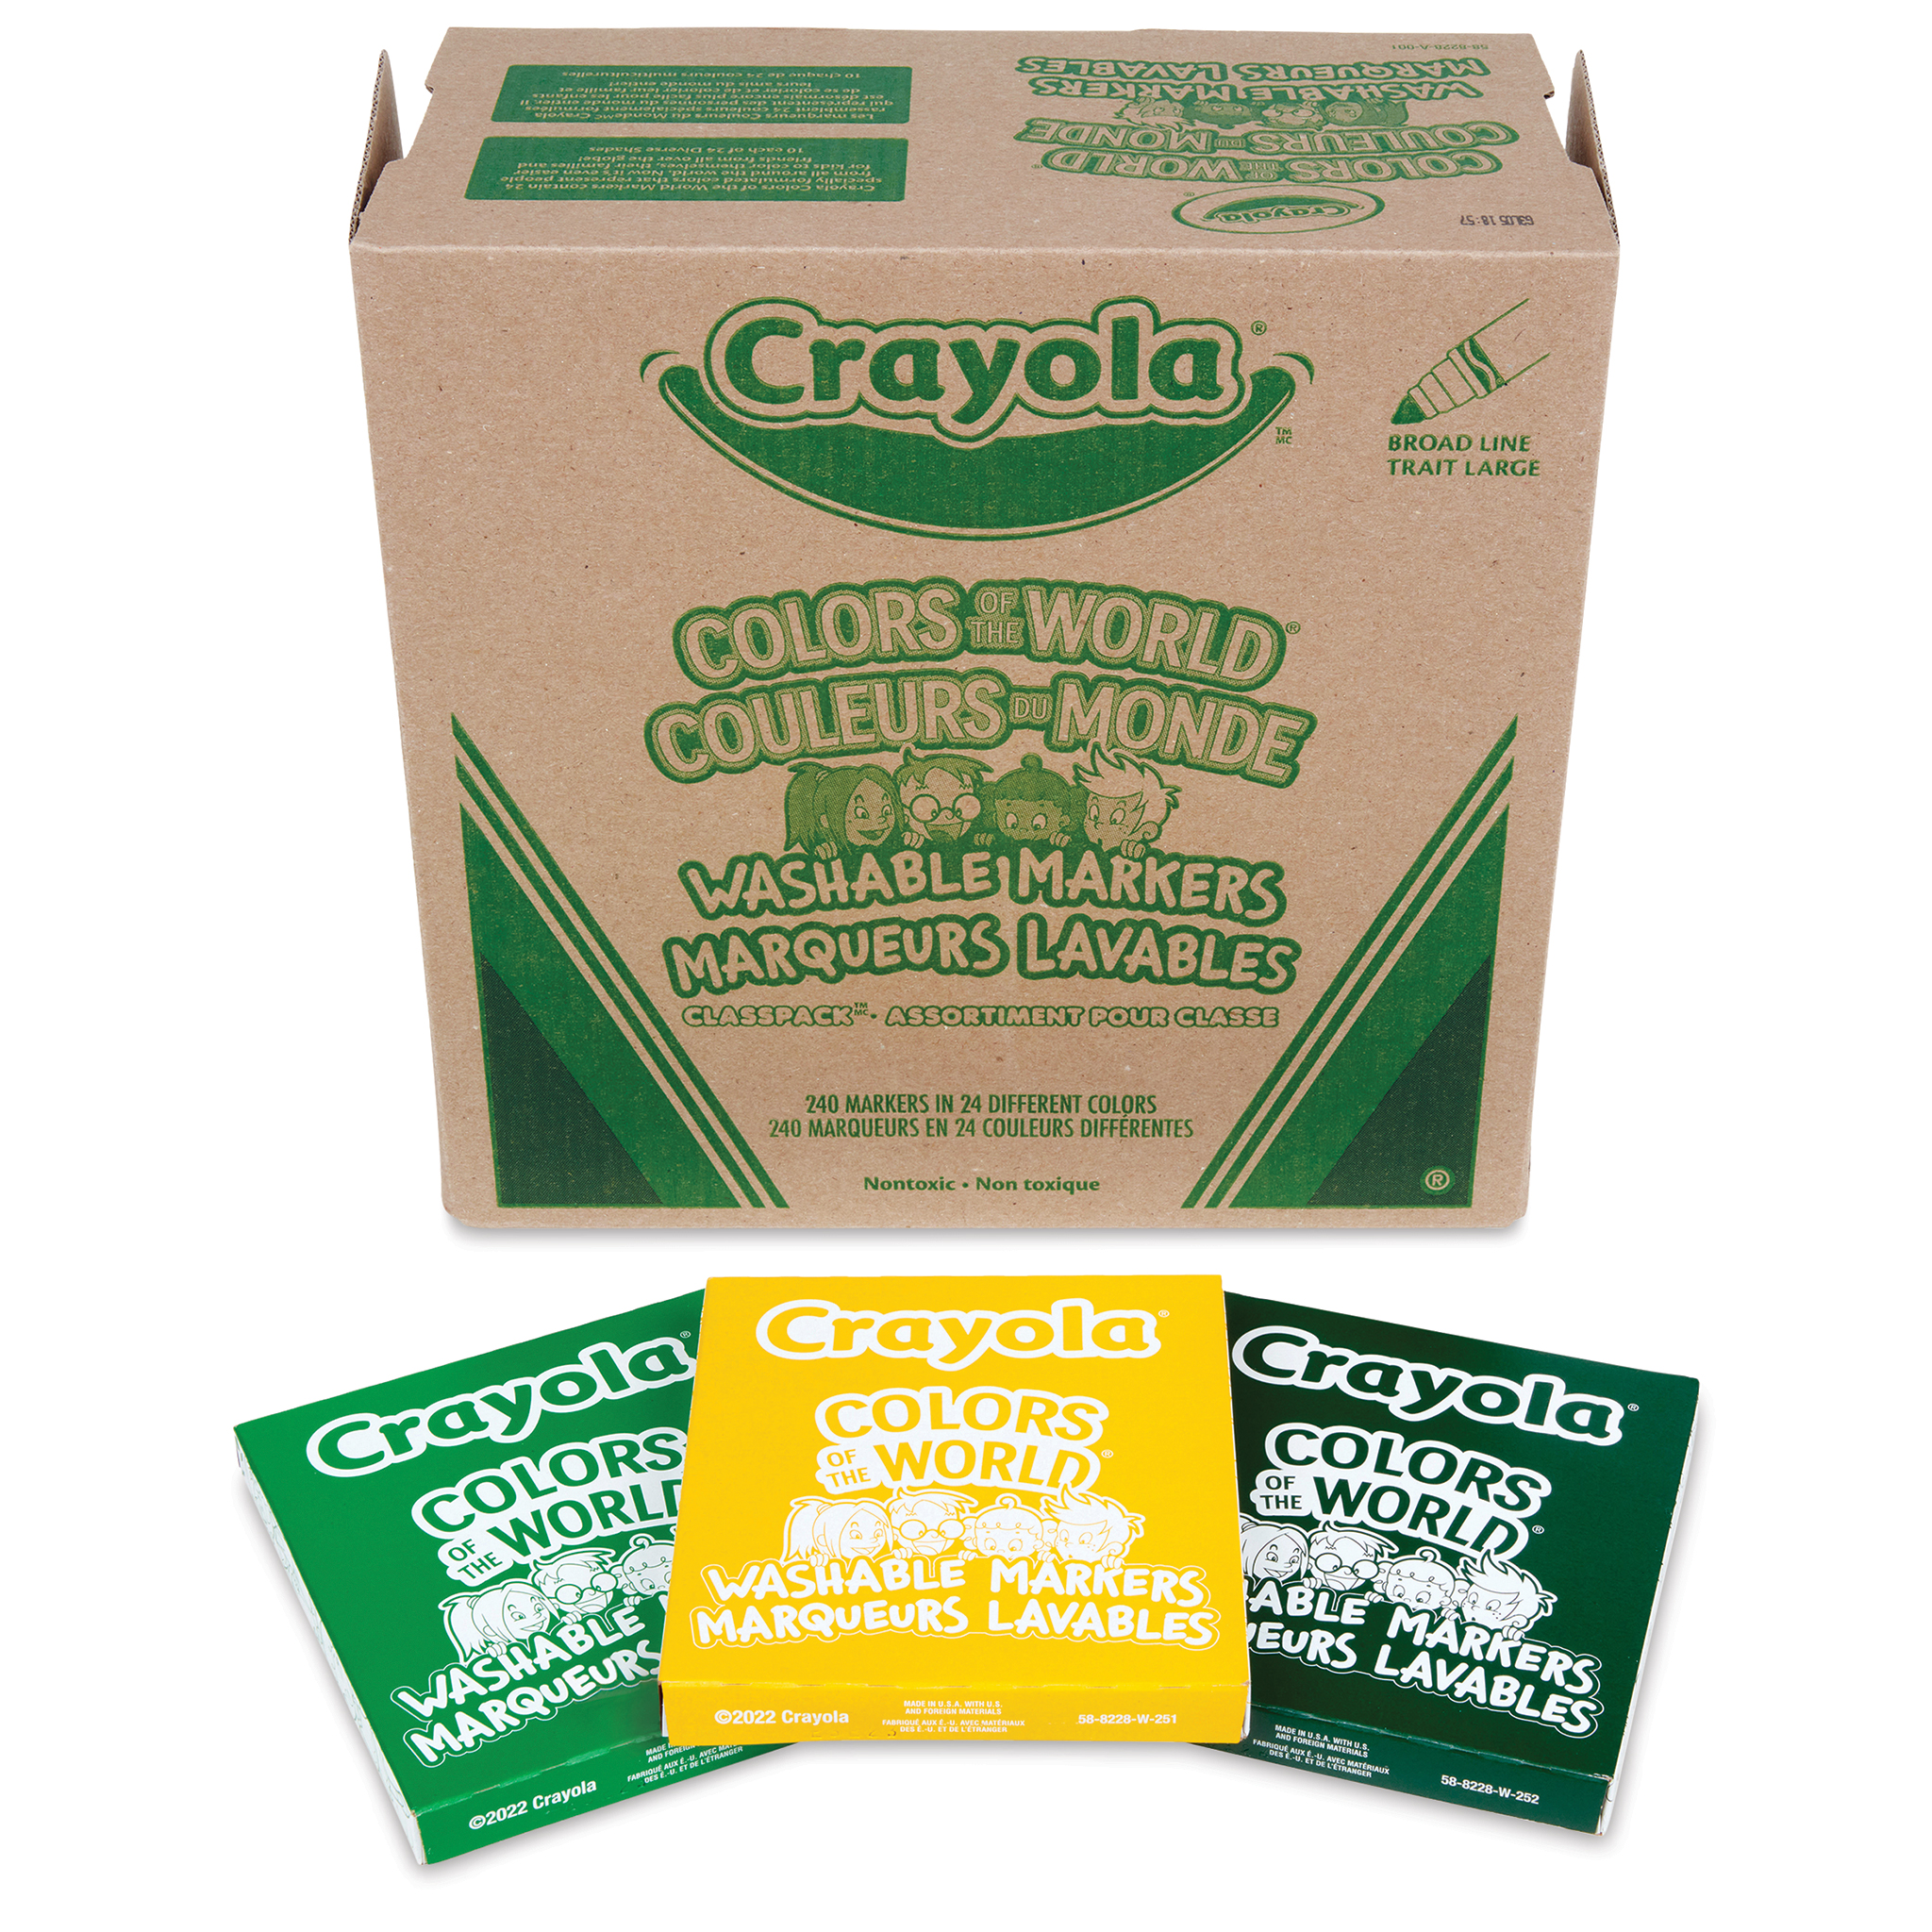 Crayola Is Launching a Line of Crayons to Represent the World's